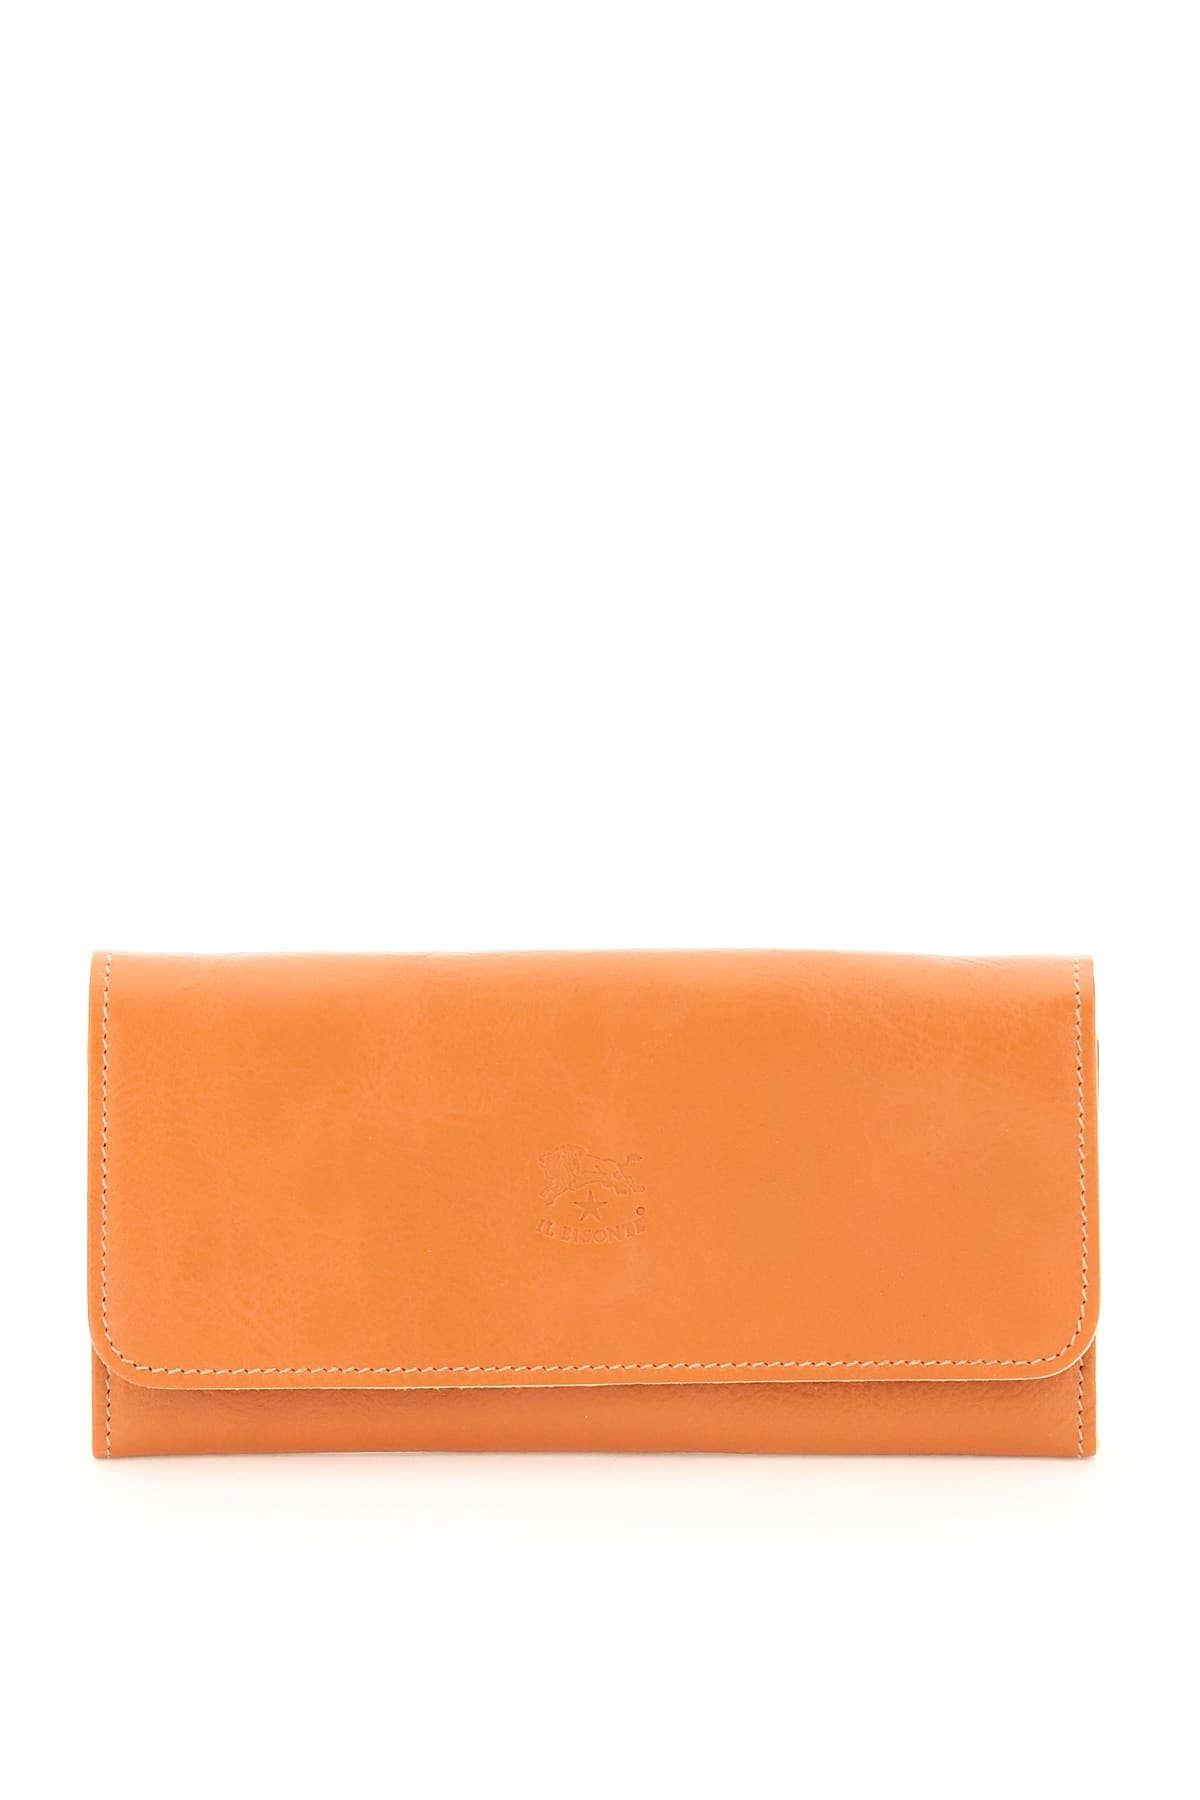 Il Bisonte Double Cowhide Leather Long Wallet